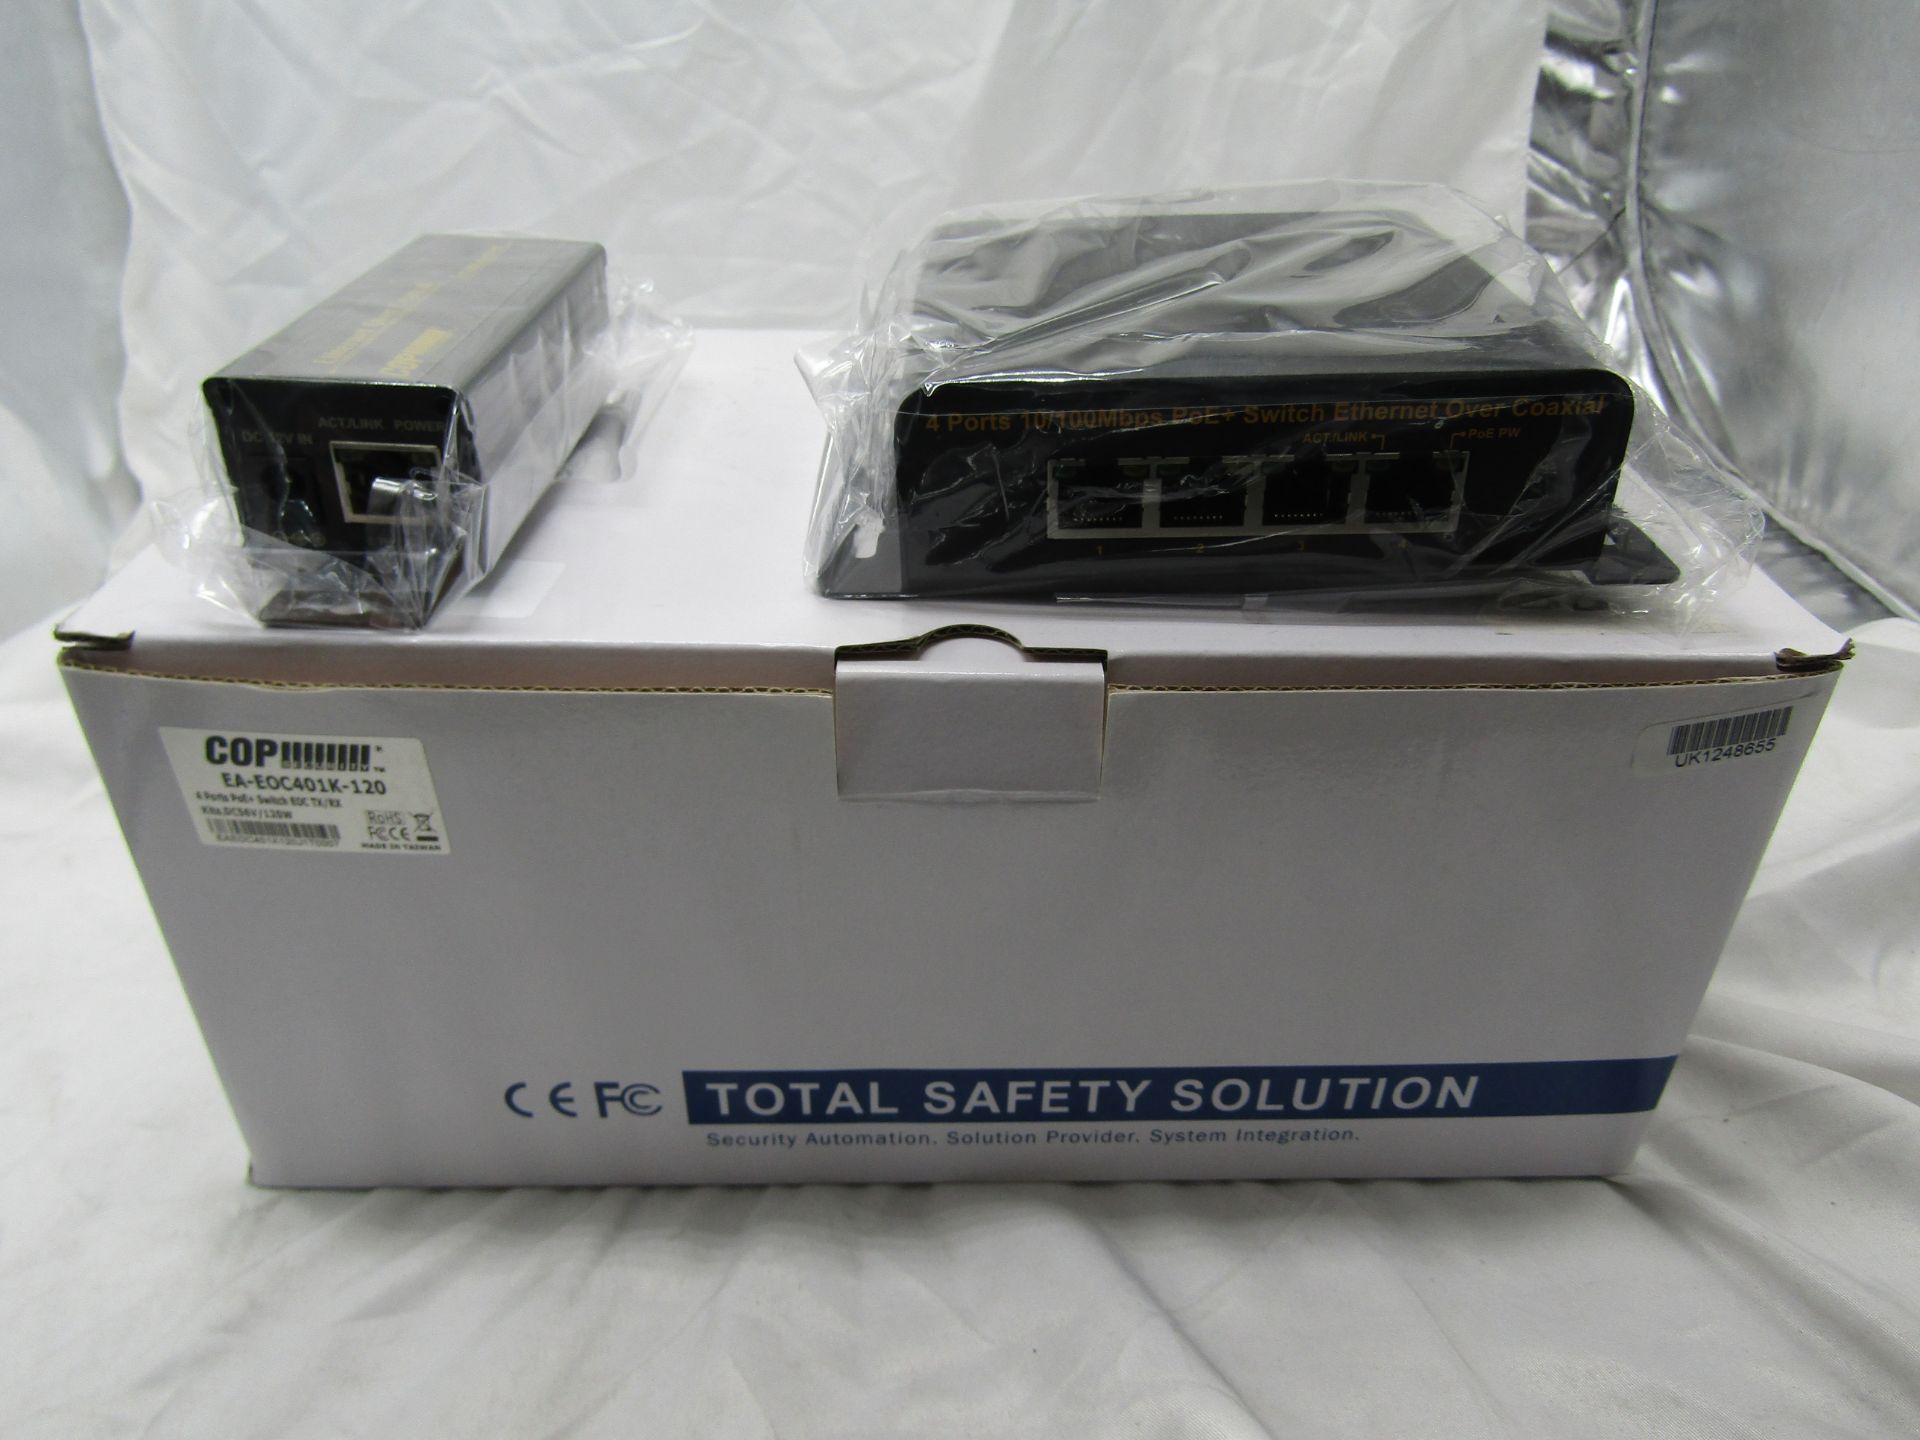 one lot of over 200 items of CCTV and Surveillance equipment, includes DVRs, Cameras, Thermal - Image 90 of 104